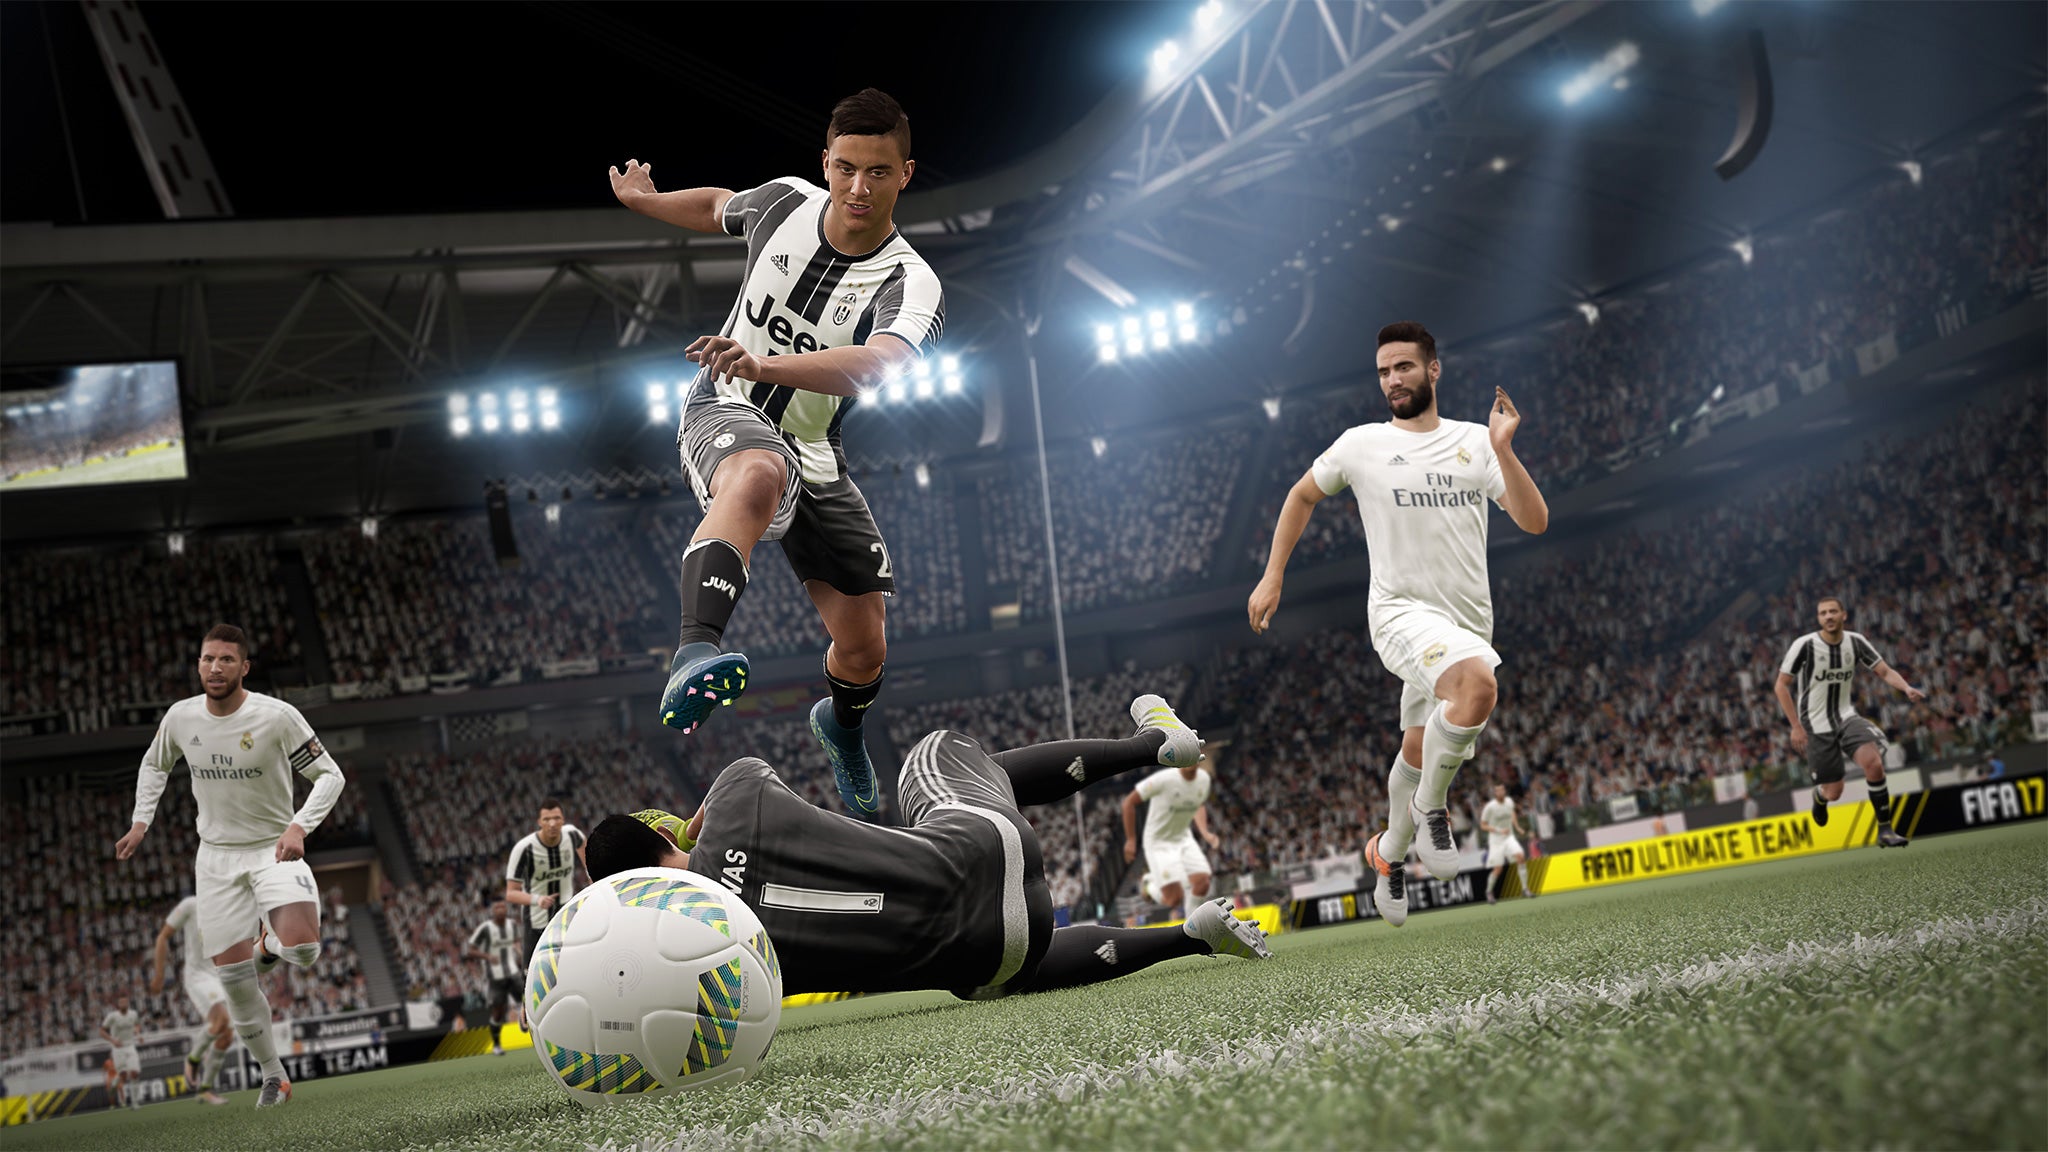 FIFA 17 update 4 for Xbox One and PS4 is now live FUT changes detailed VG247